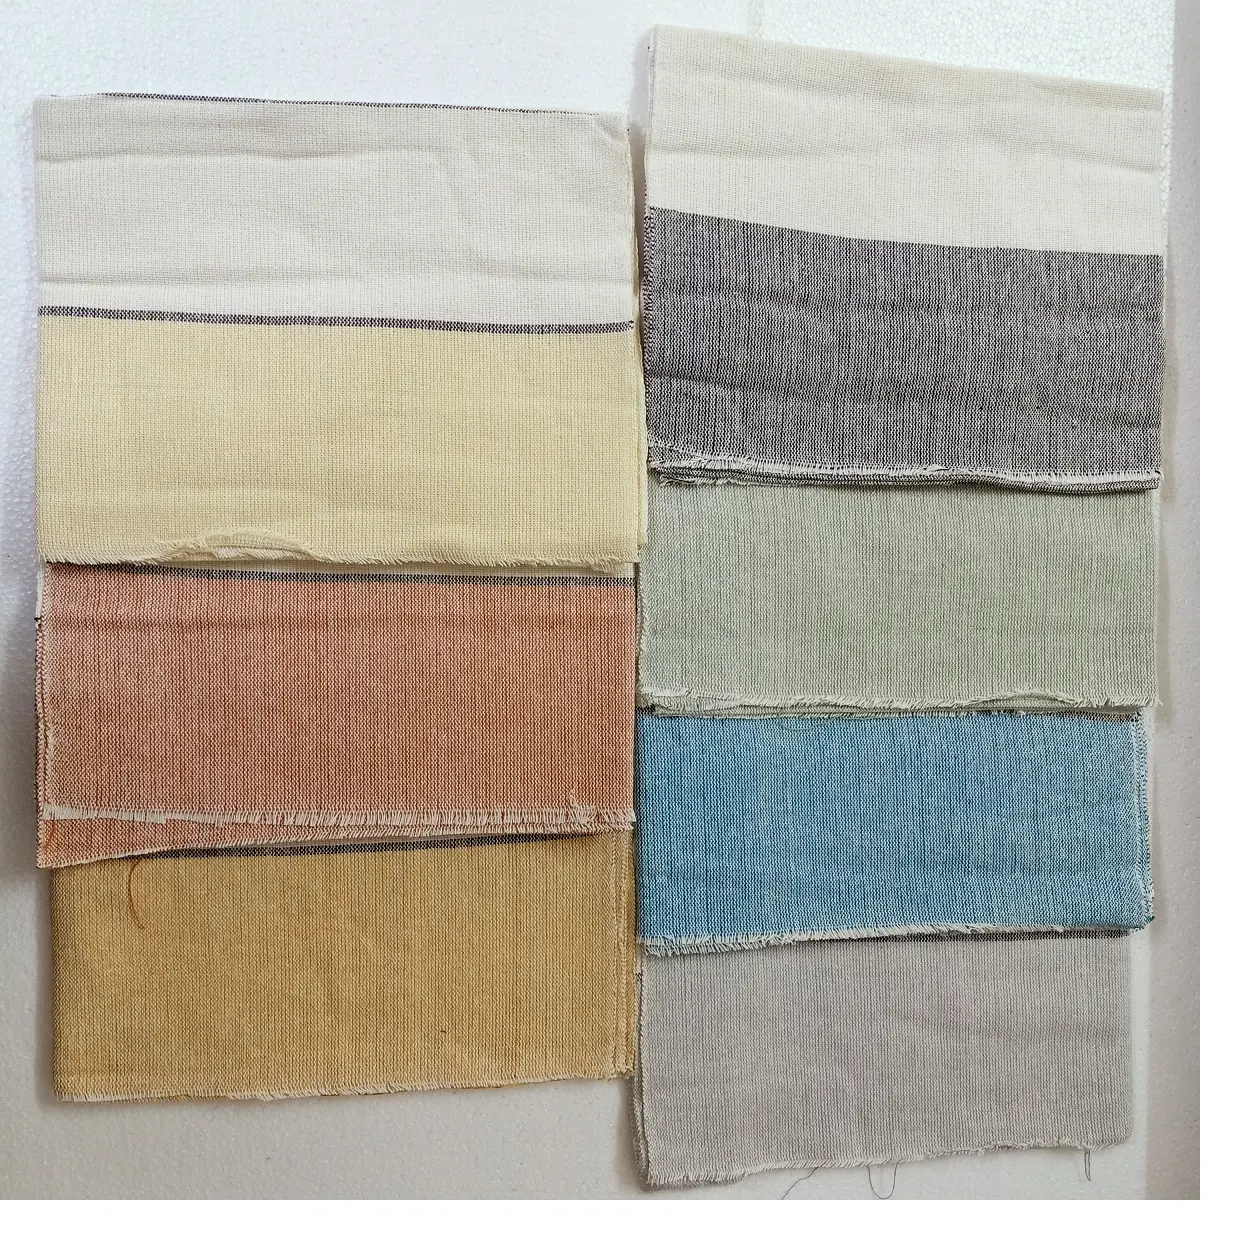 custom made hand woven cotton towels in assorted colors made for resale by home textile stores